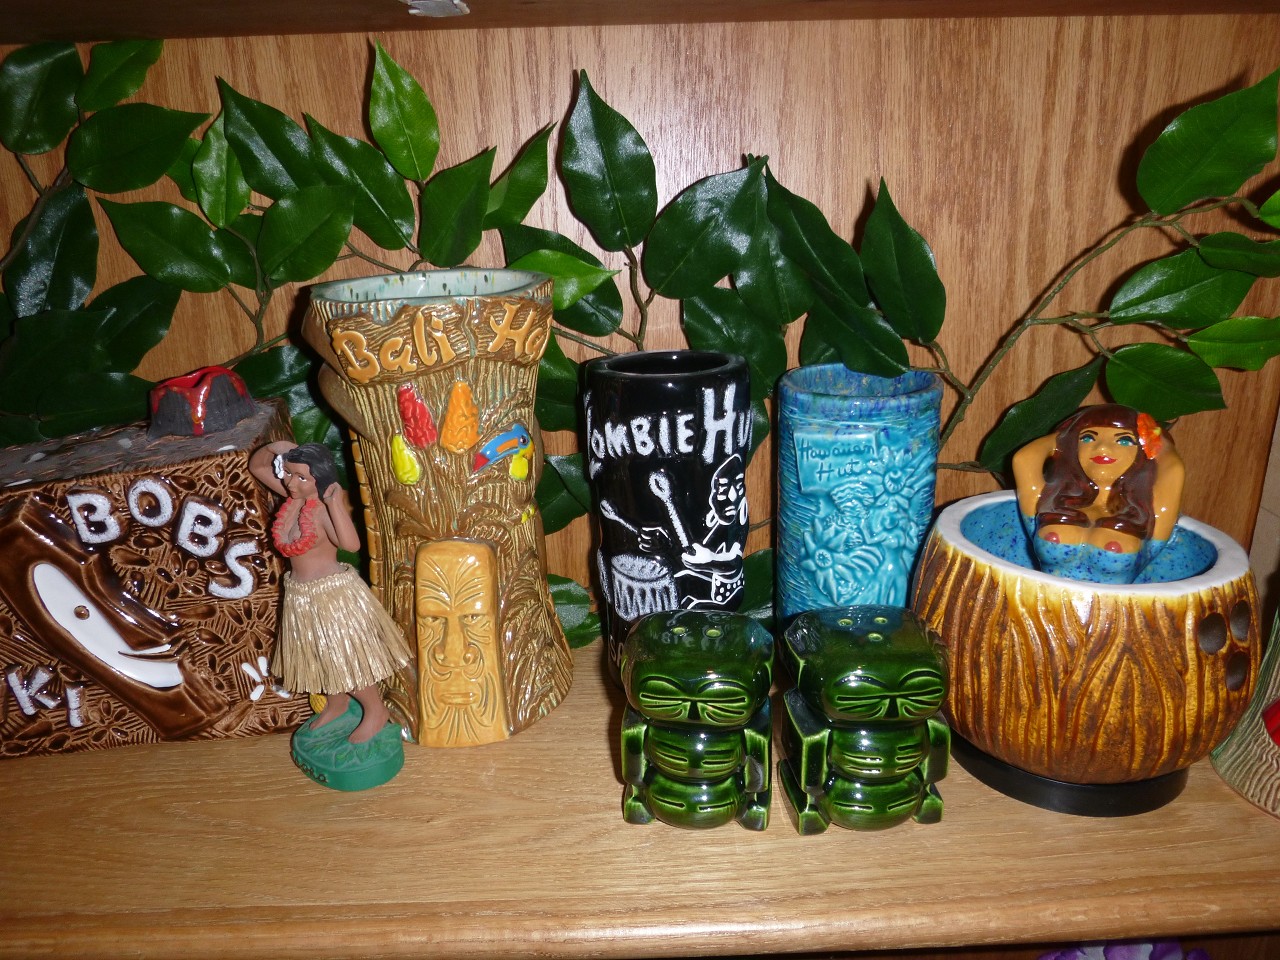 Nook redone and Zombie mugs into jungle room 7 19 23 on fb tc (16)